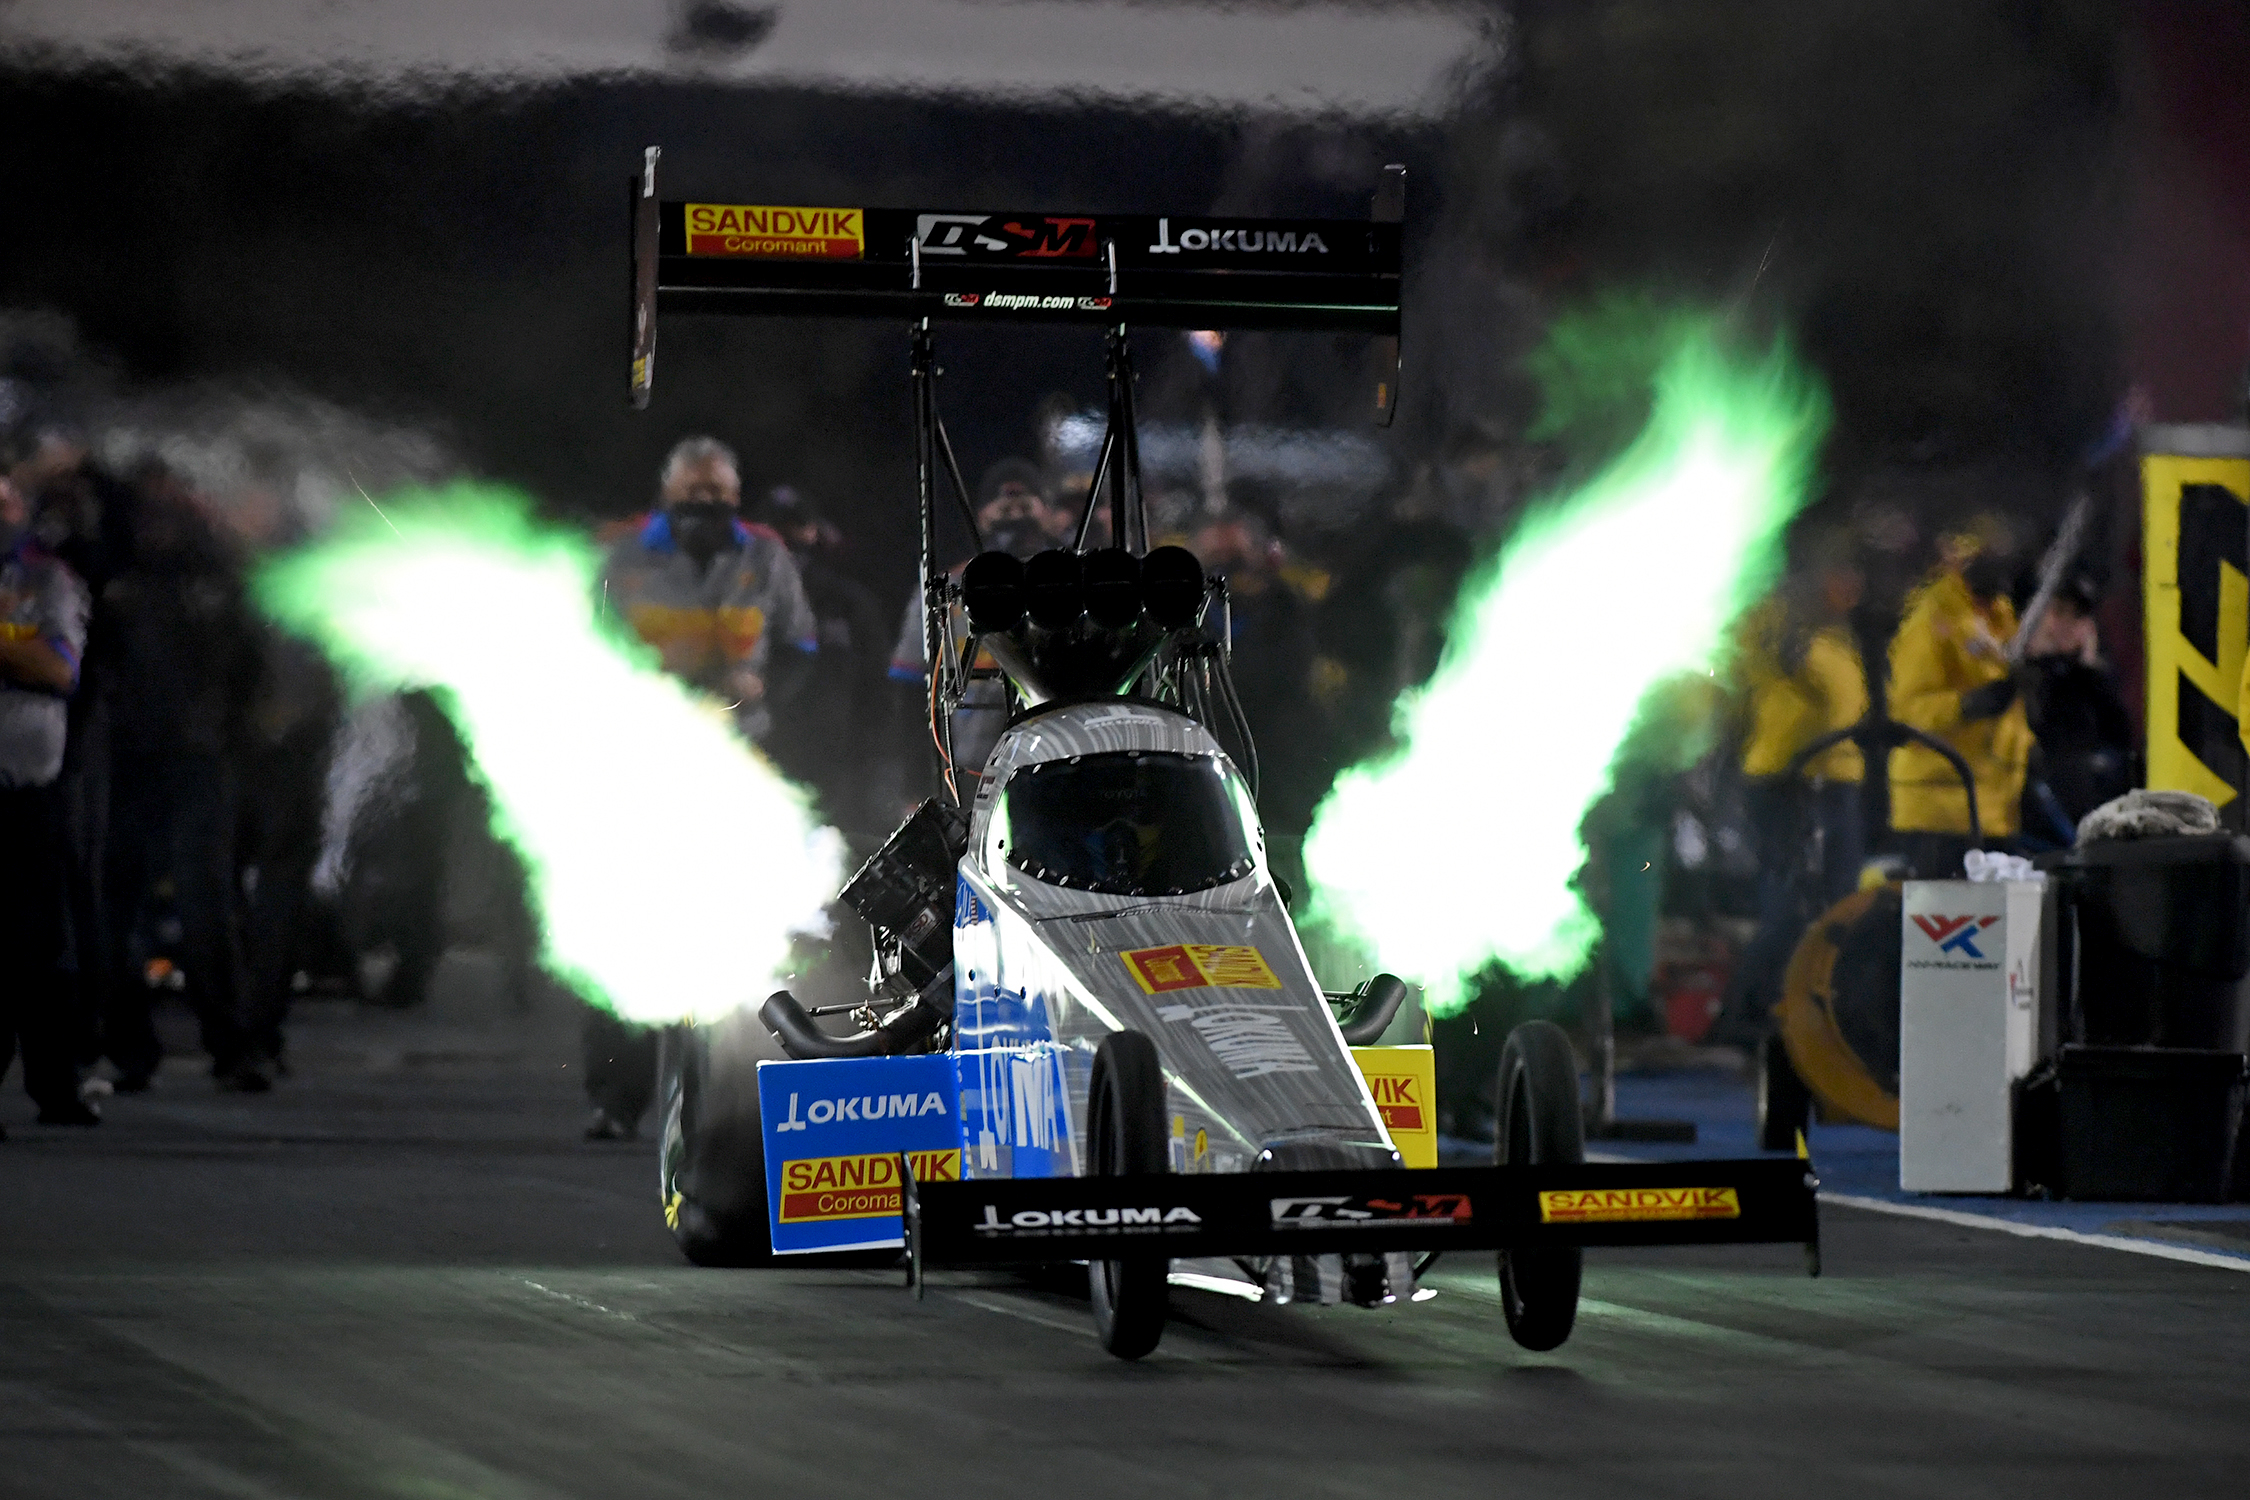 Tony Schumacher Sets Fuel Speed Record During NHRA Qualifying In St. Louis - Drag | Drag Racing News, Opinion, Interviews, Photos, Videos and More